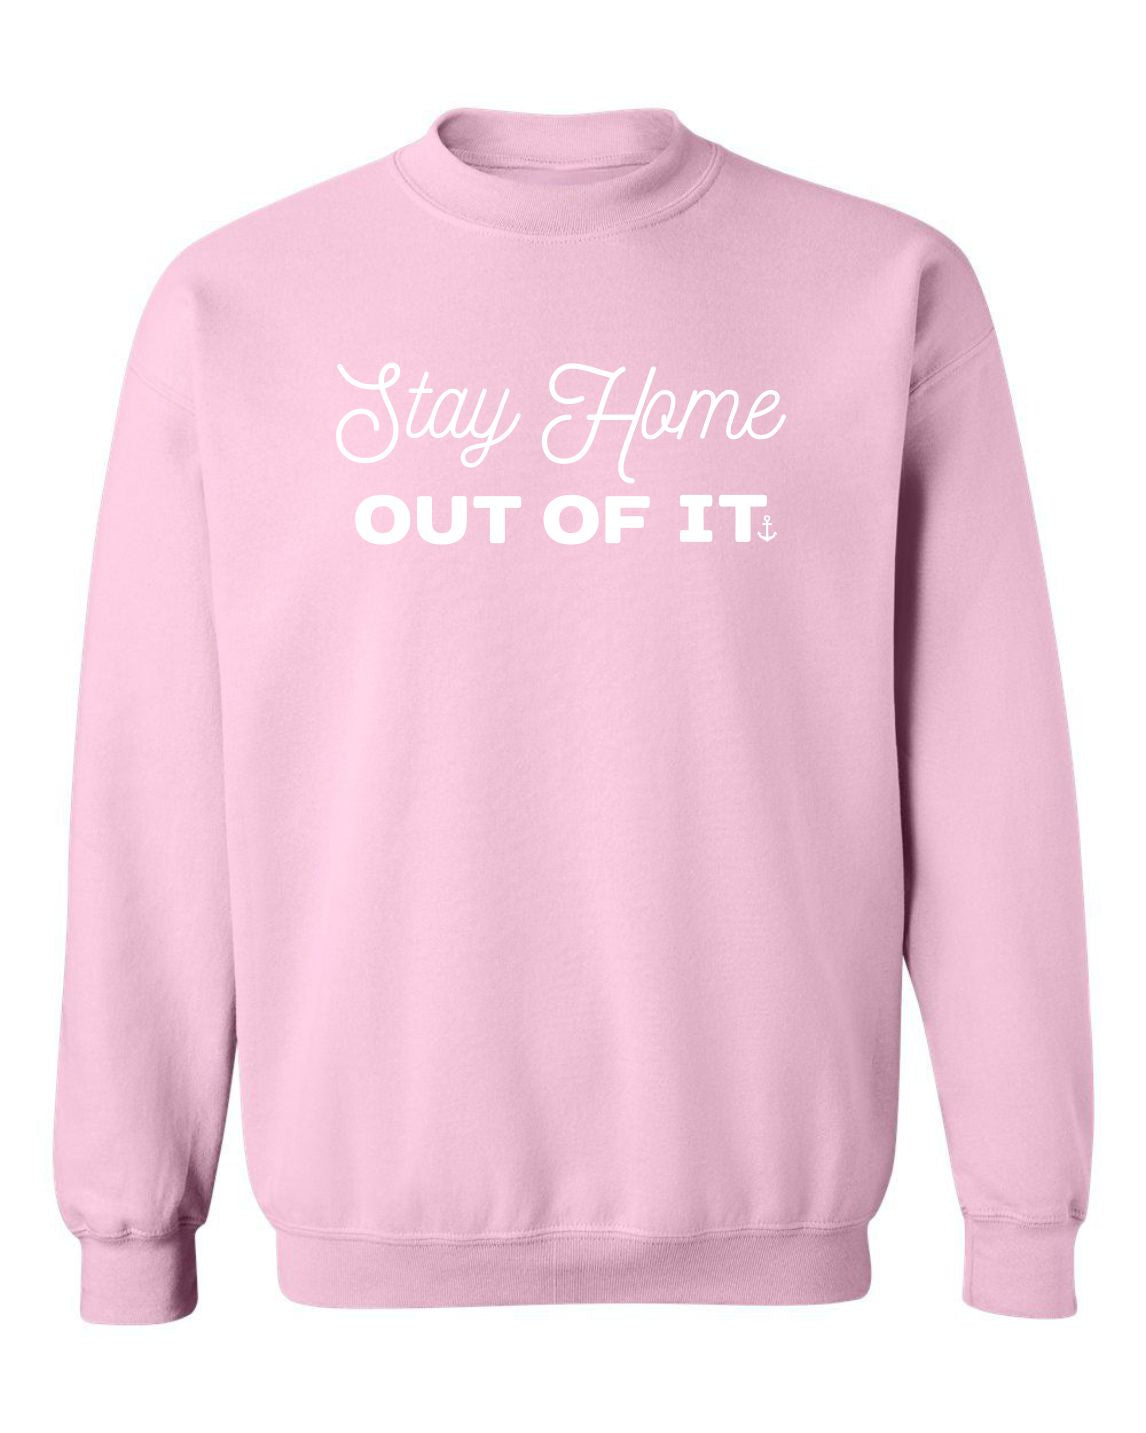 "Stay Home Out Of It" Unisex Crewneck Sweatshirt